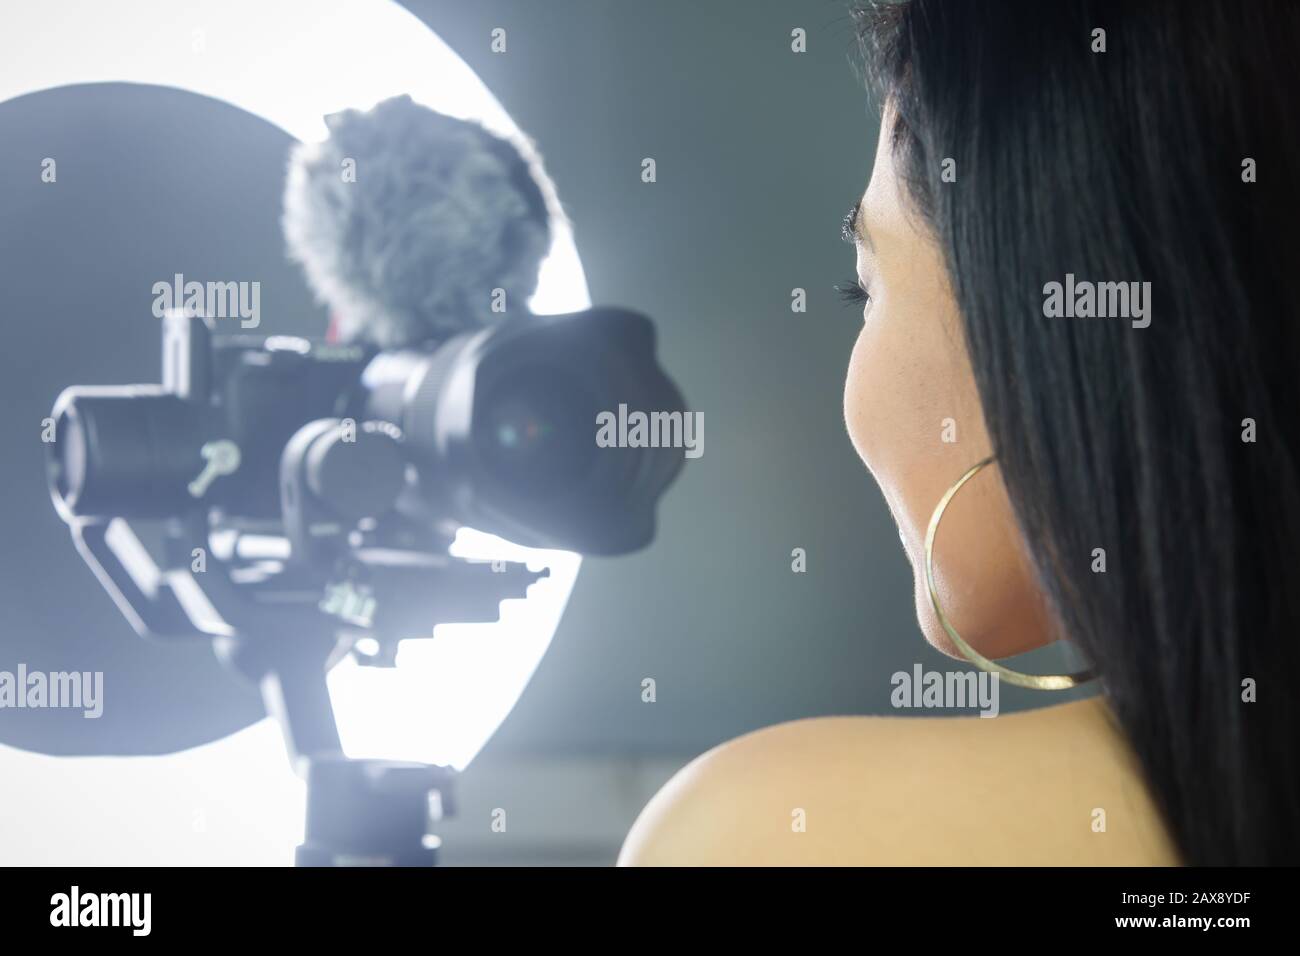 Female vlogger doing a video. Stock Photo